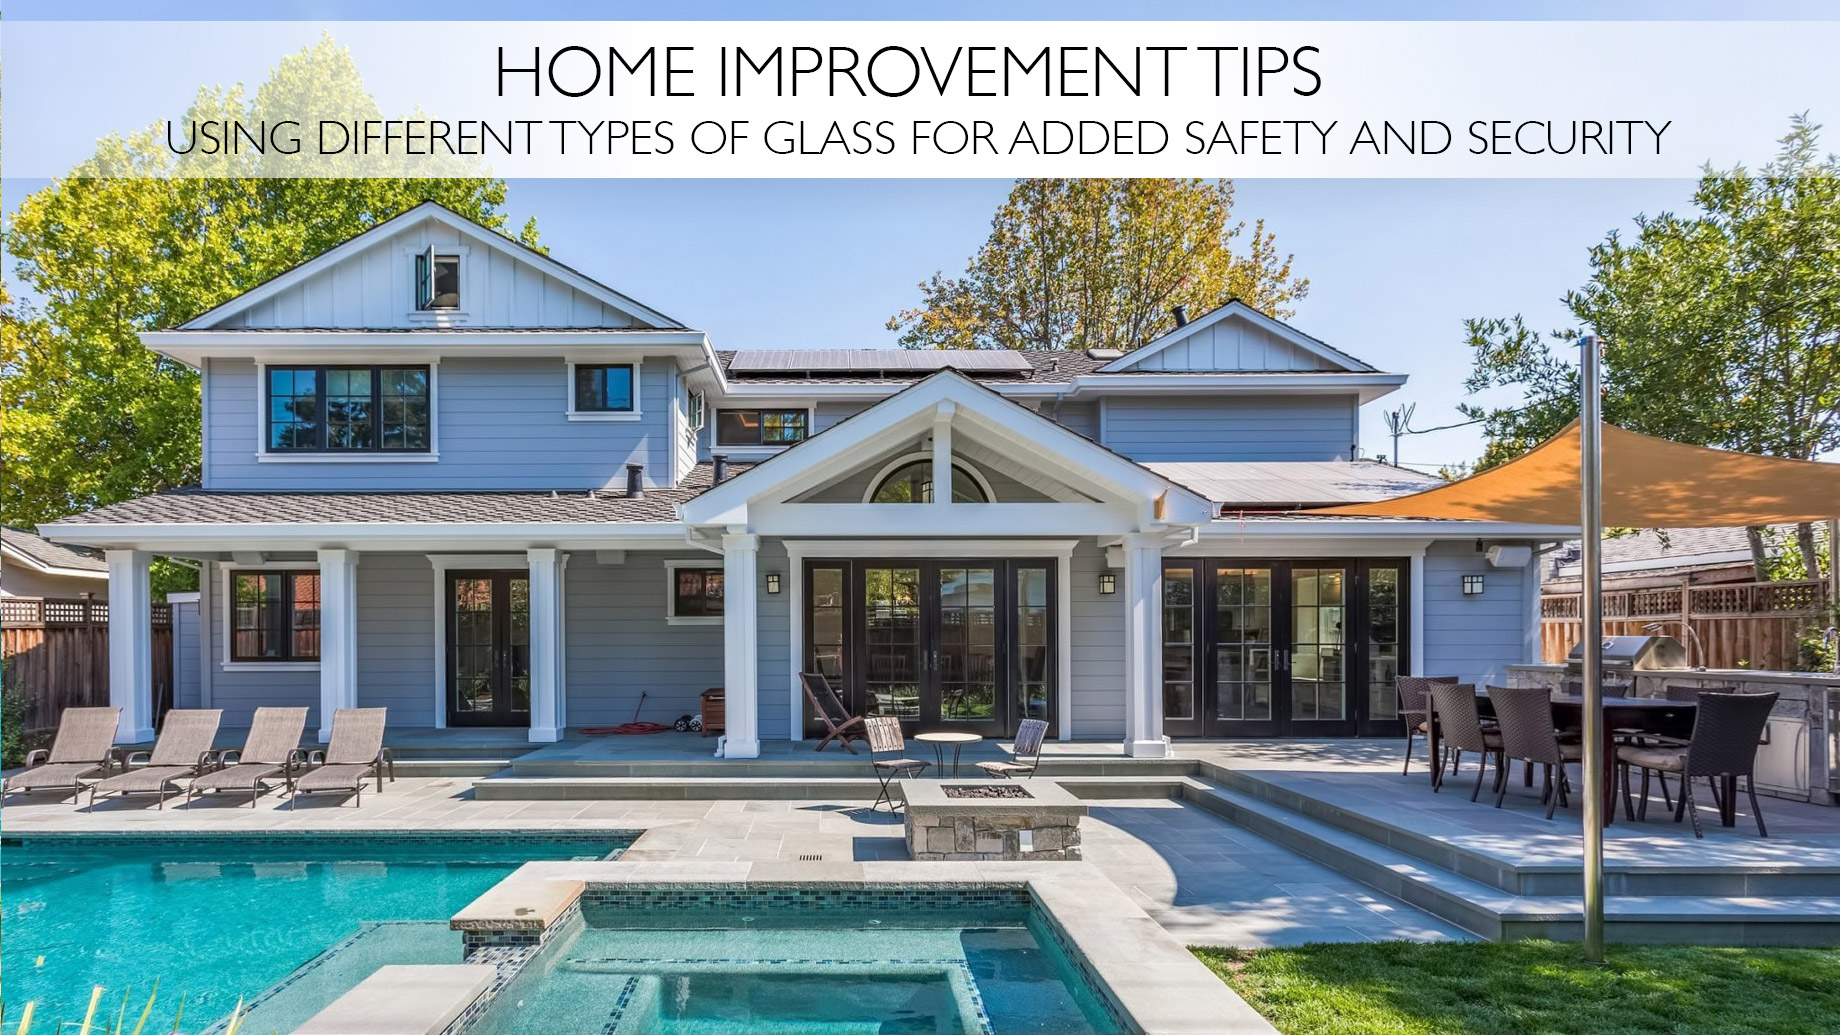 Home Improvement Tips – Using Different Types of Glass For Added Safety and Security